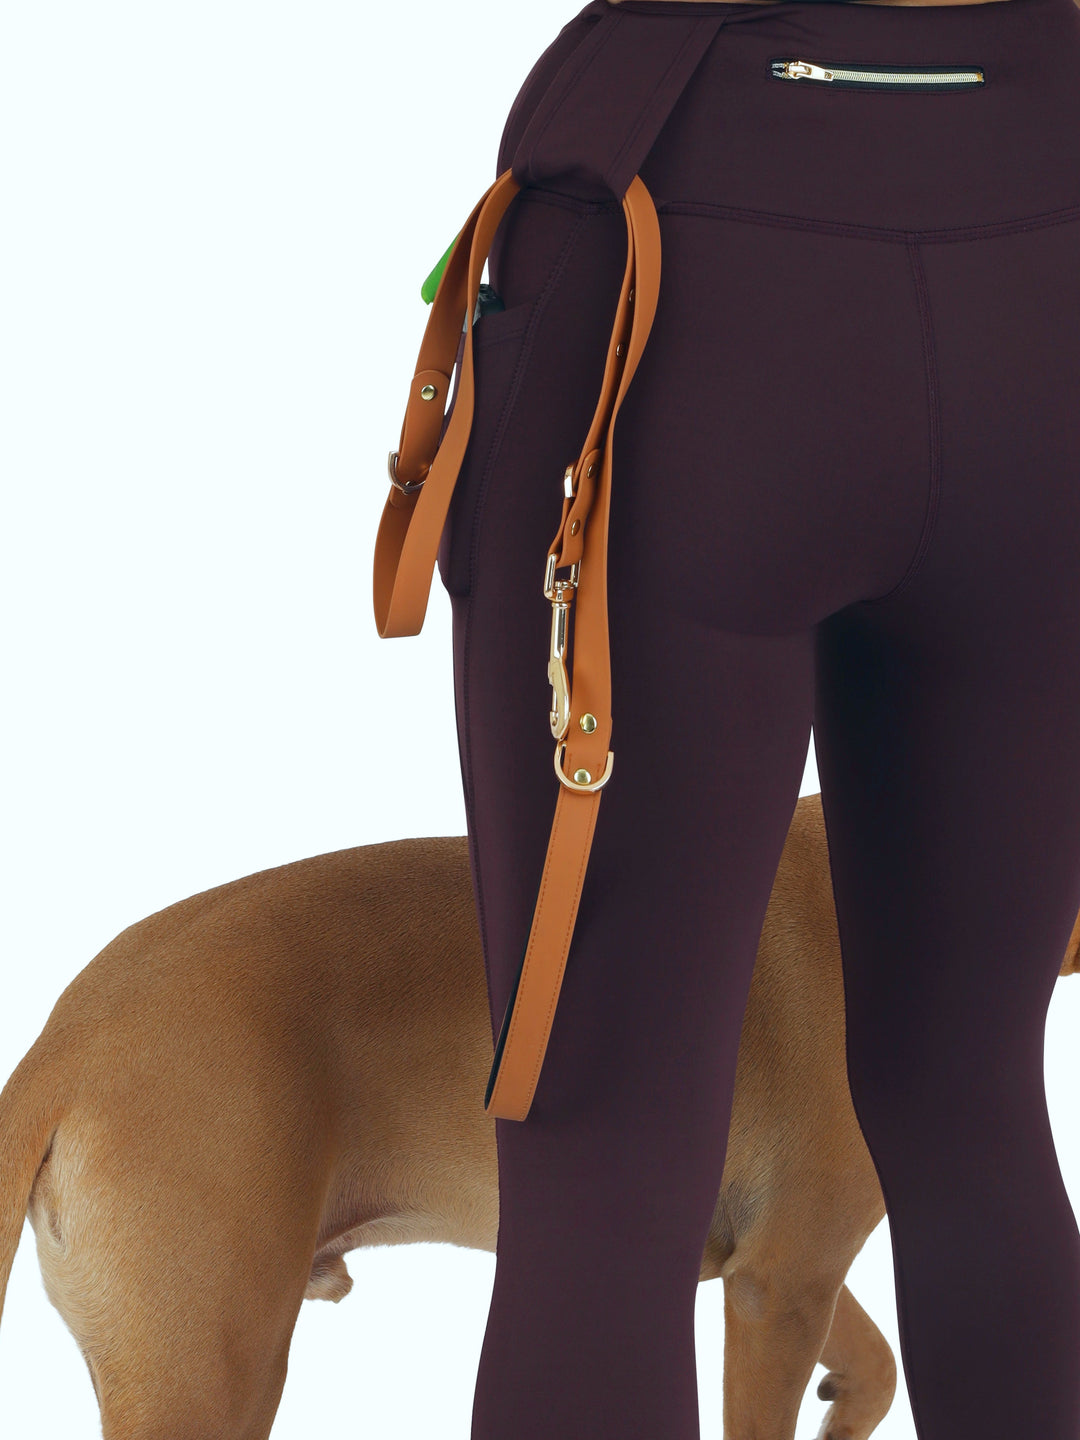 Dog leggings are the thing we didn't know we needed